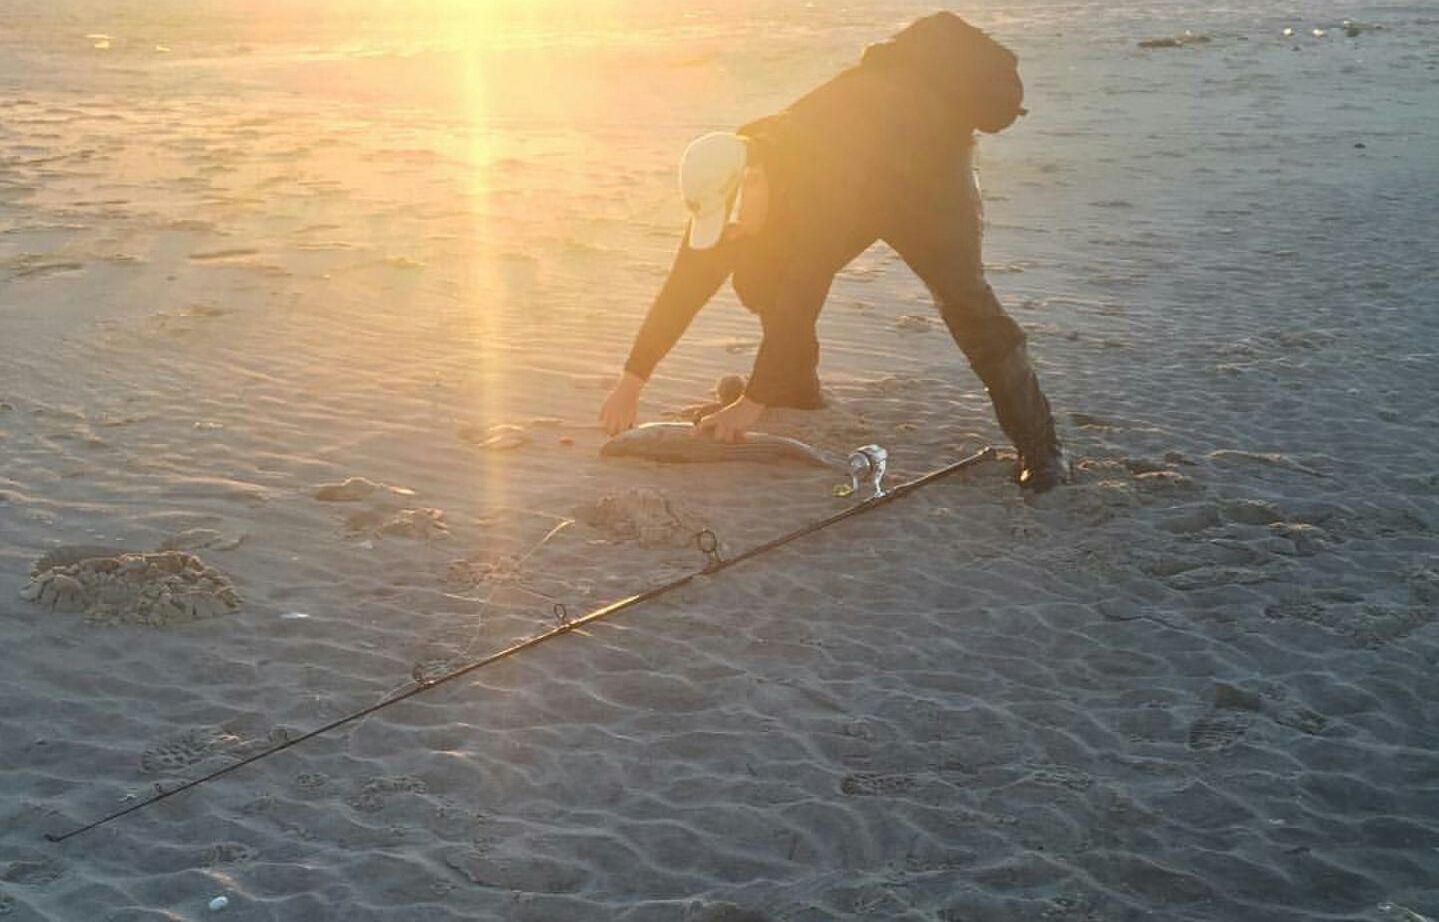 It took me a few seconds to realize this wasn't a gorilla walking on the beach